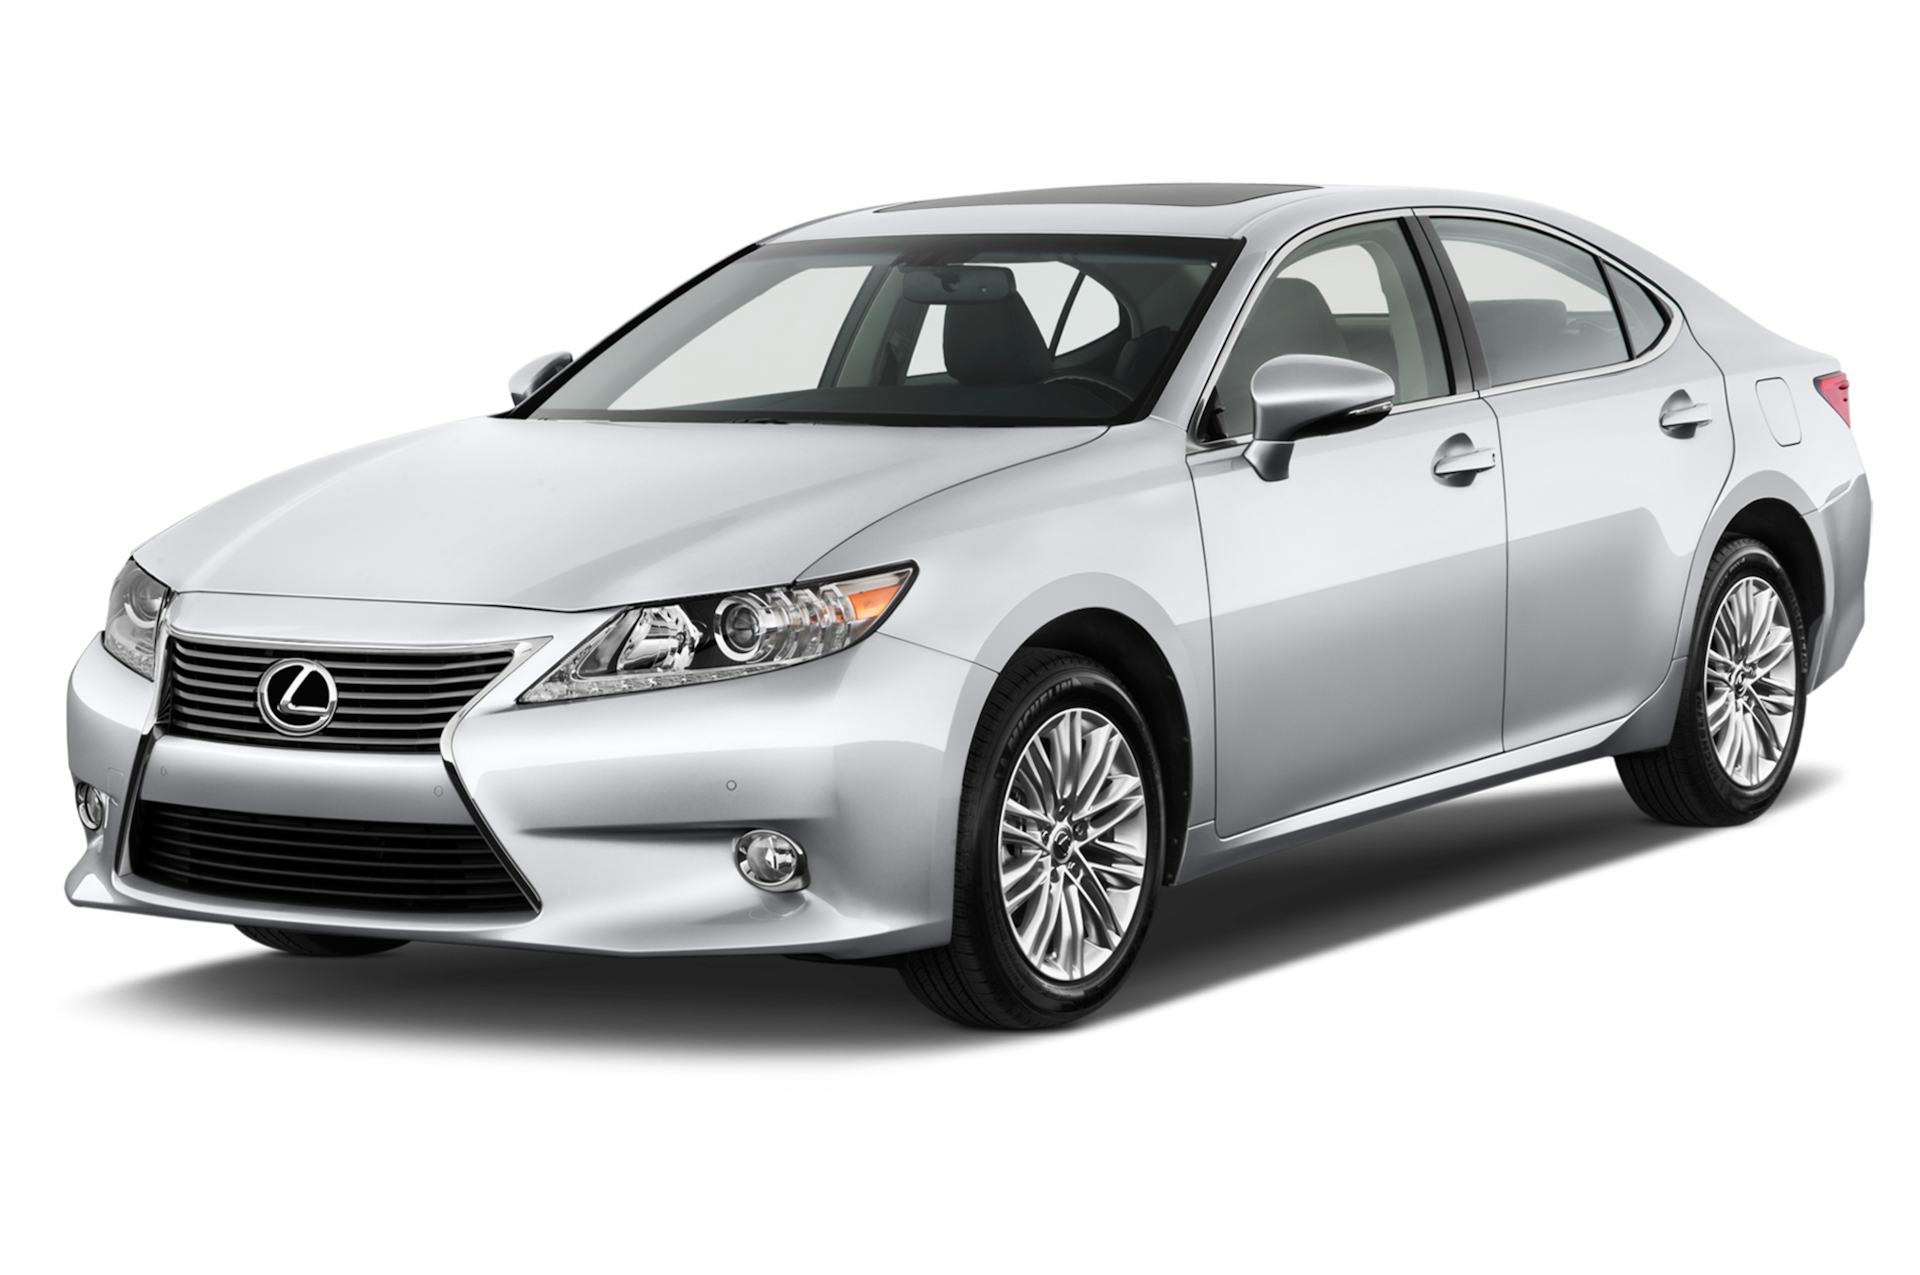 2013 Lexus ES350 Prices, Reviews, and Photos - MotorTrend